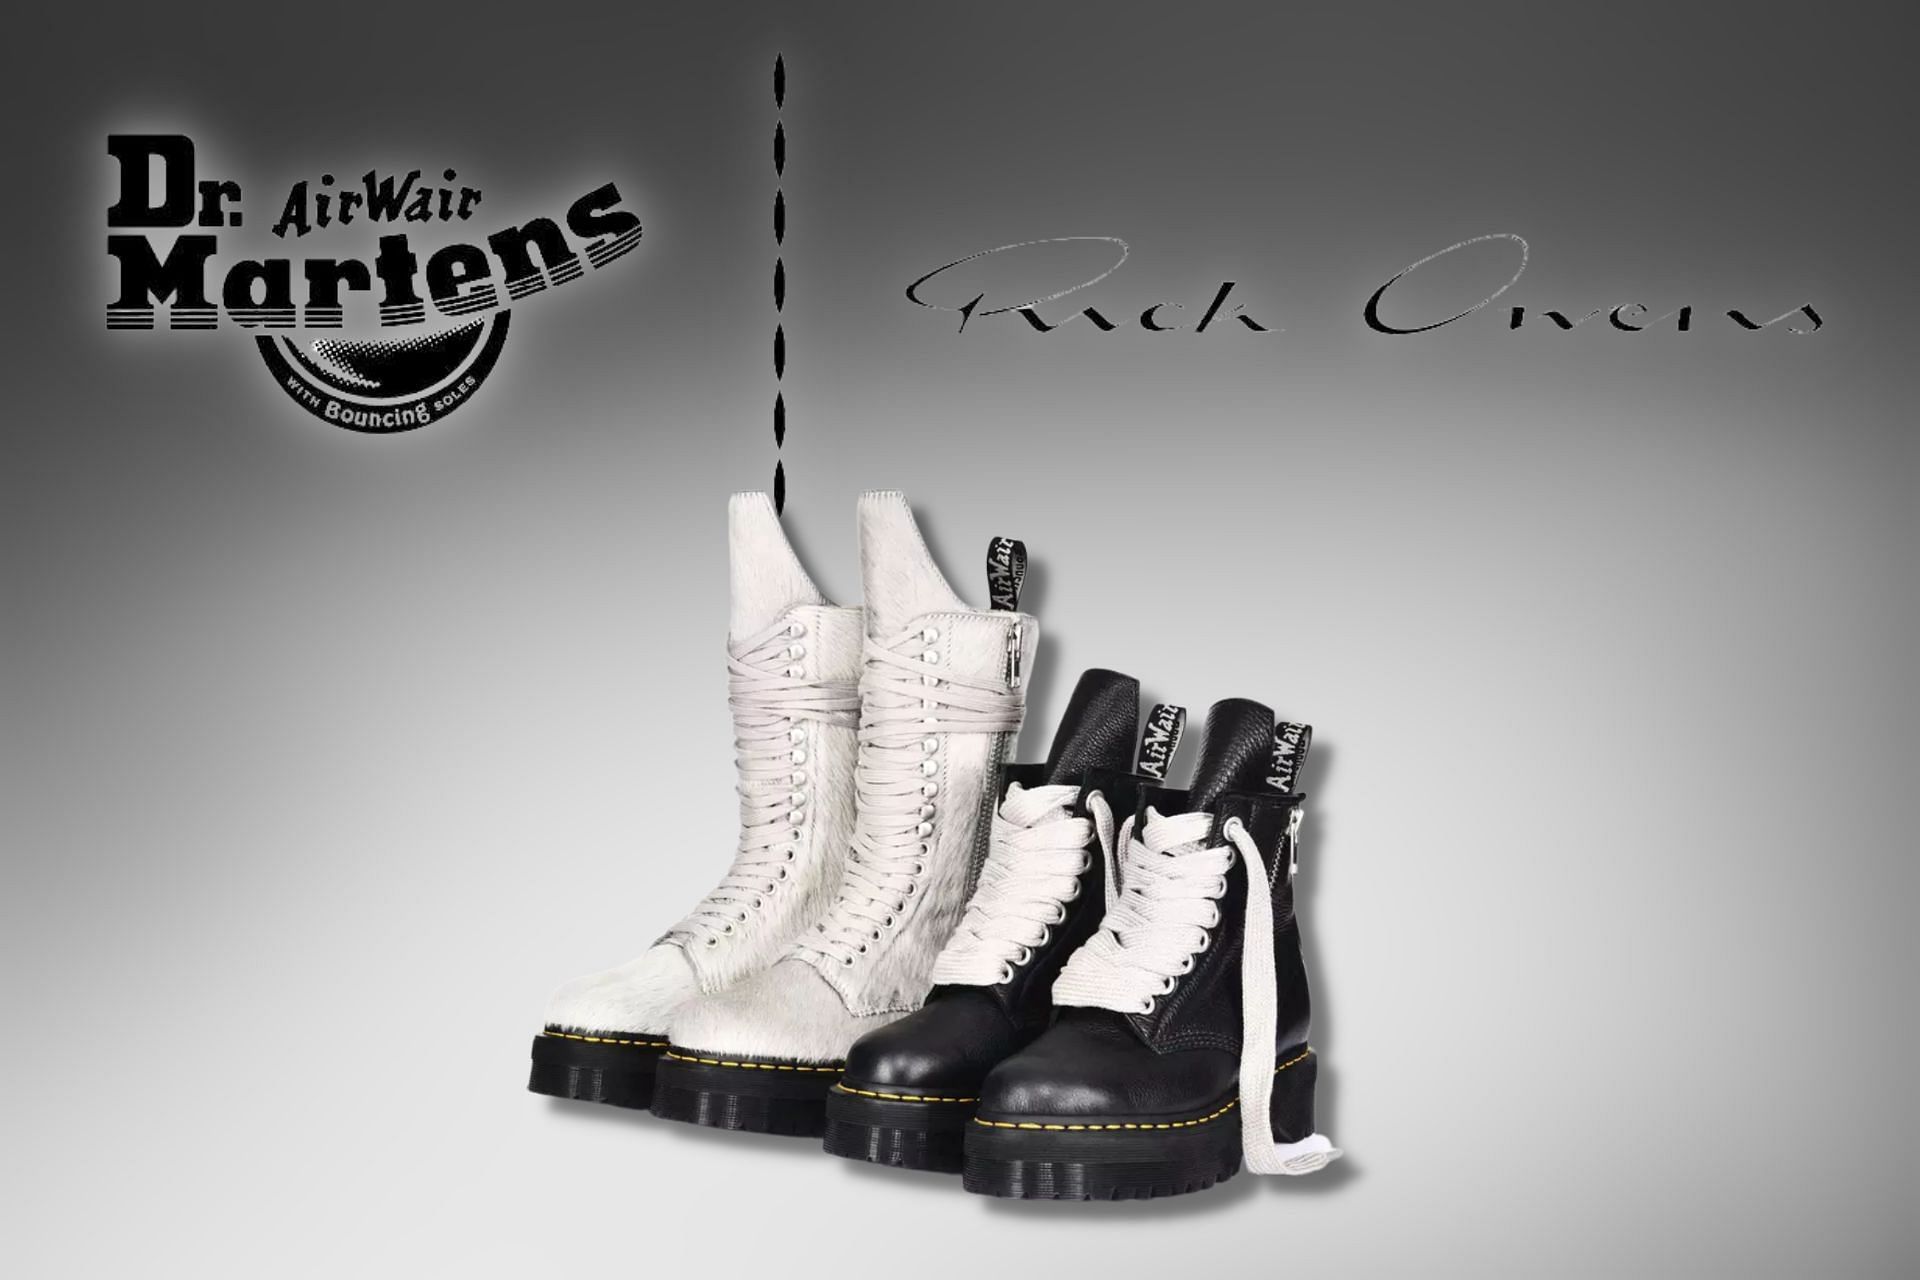 Where to buy Rick Owens x Dr. Martens boot collection? Price 